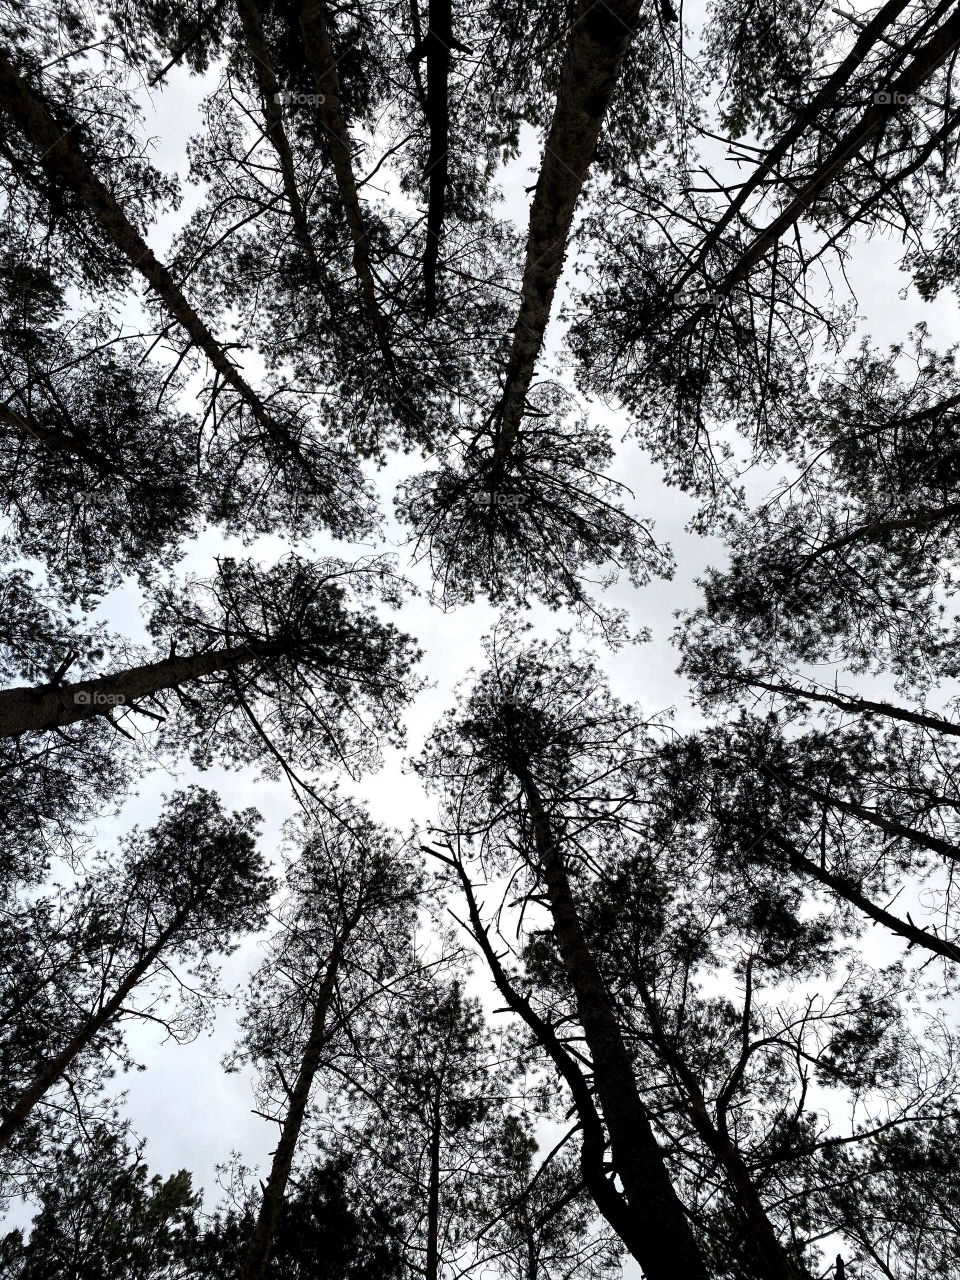 Trees above